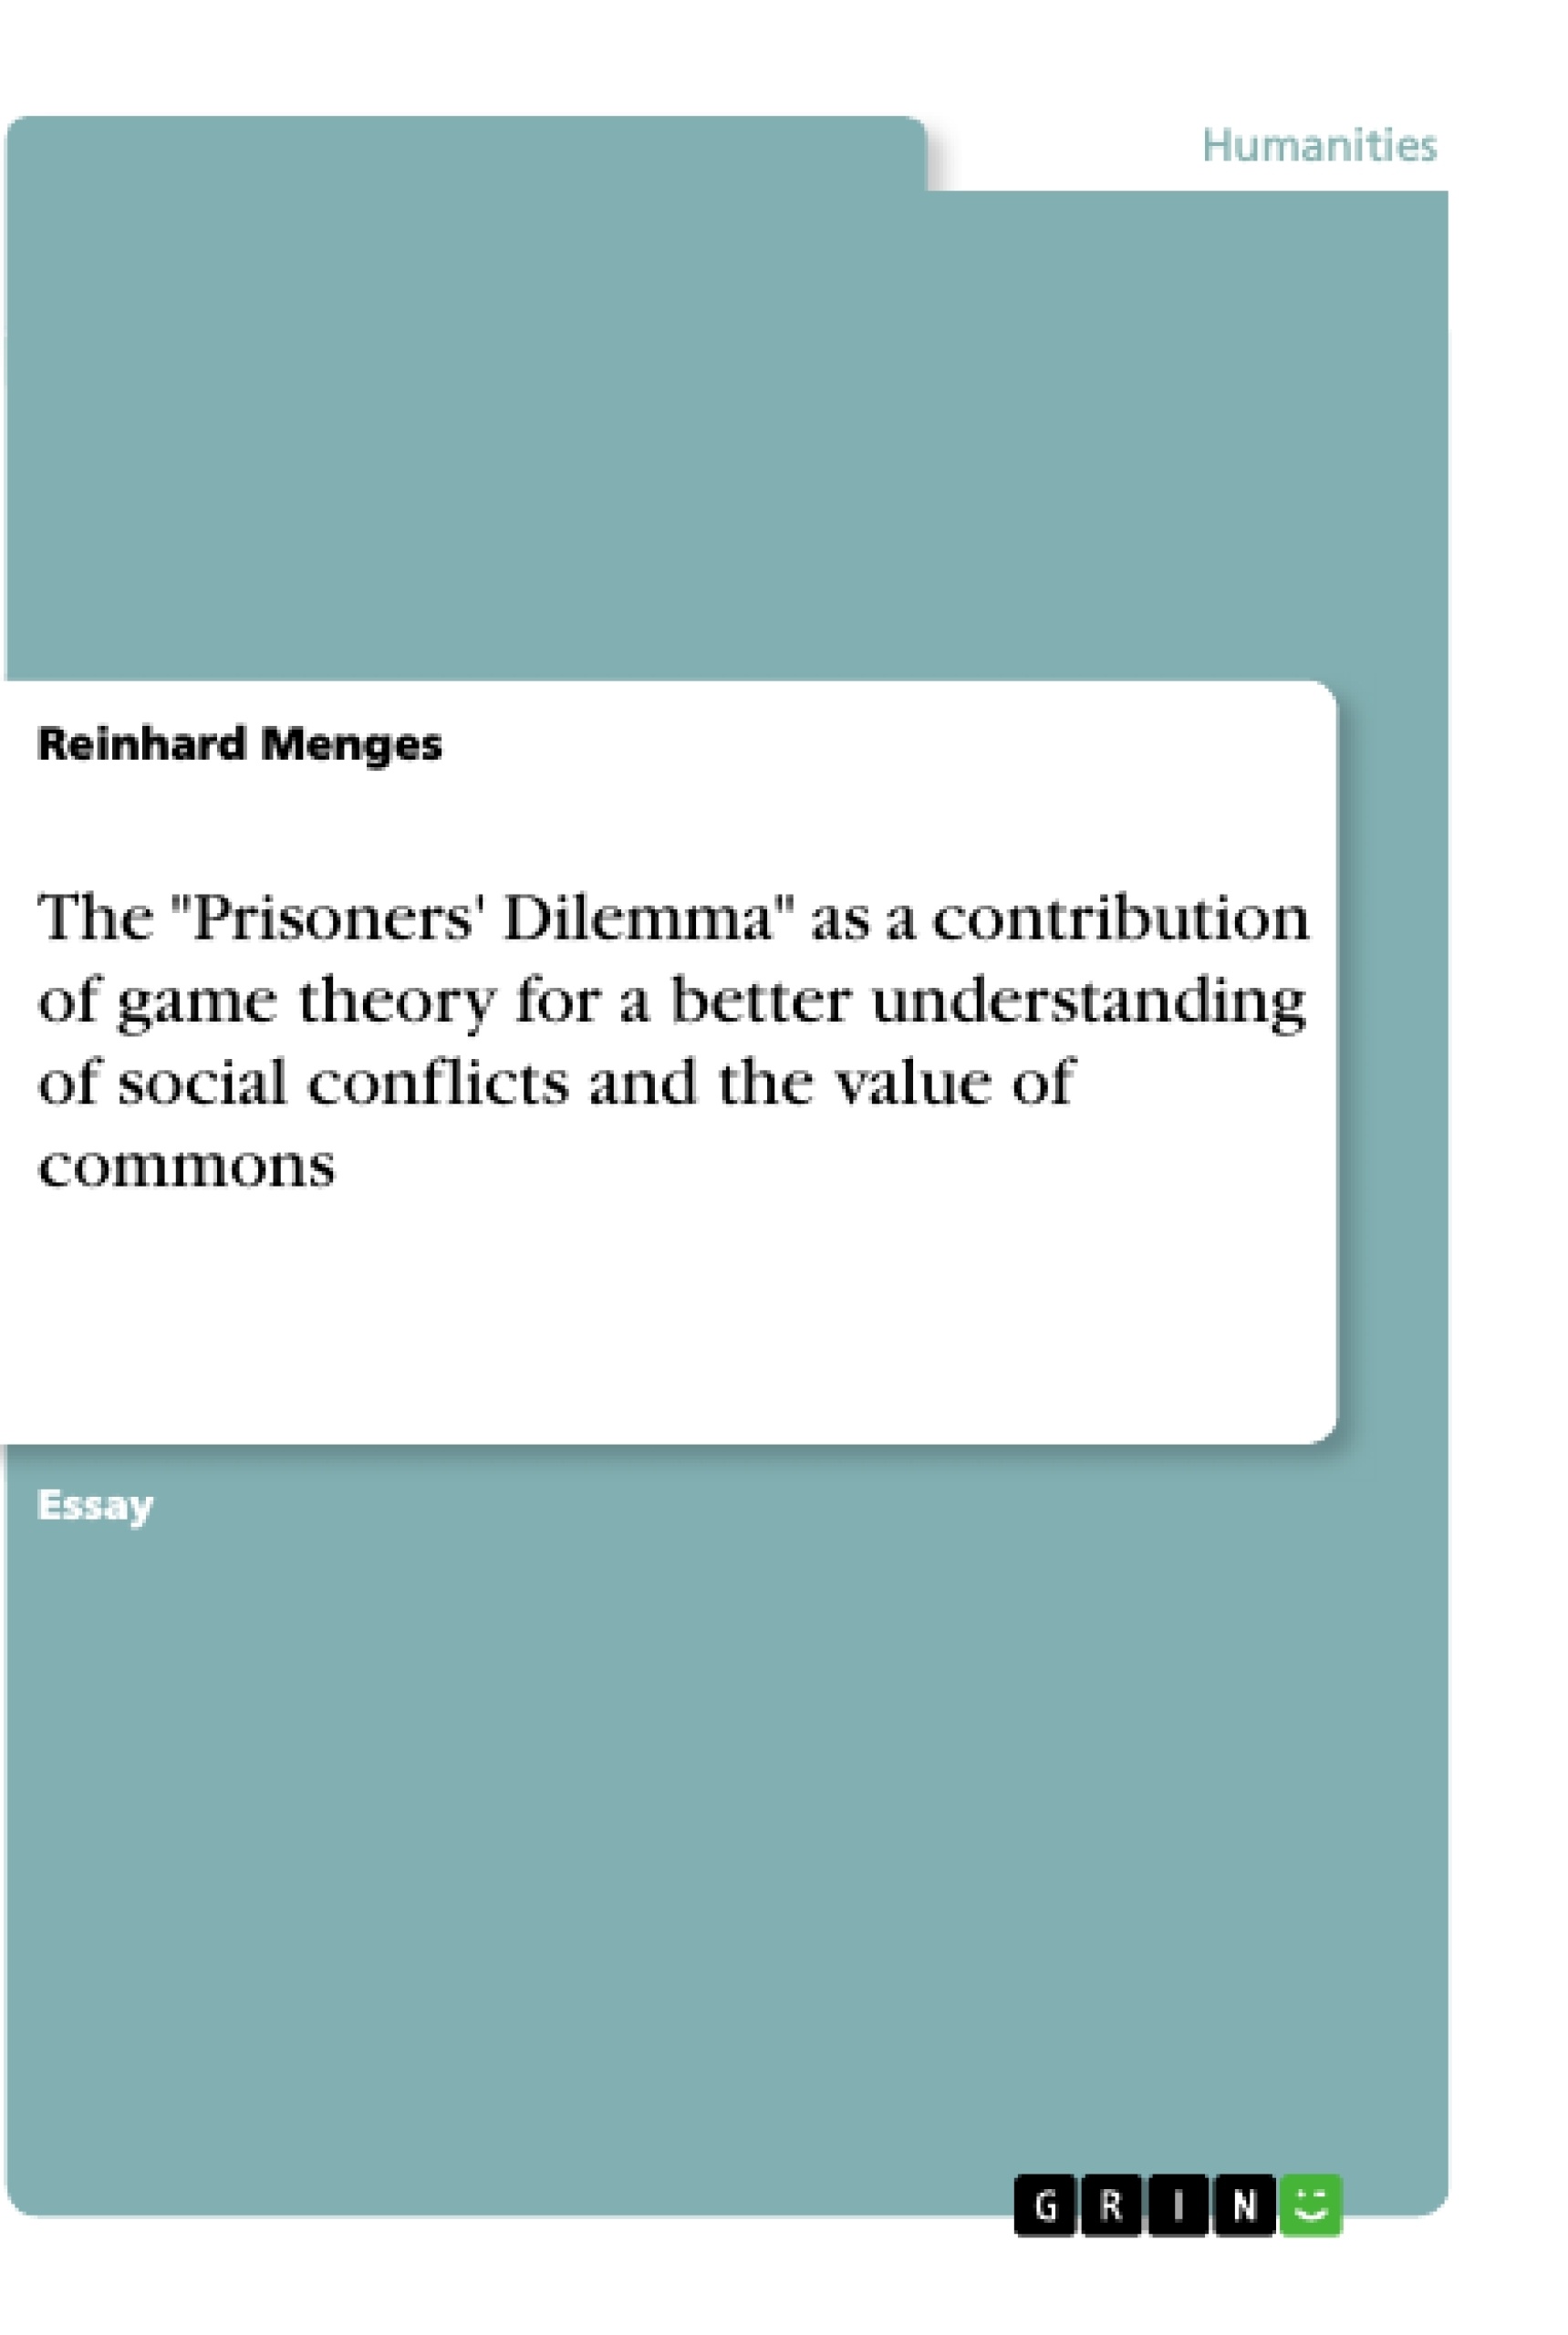 Title: The "Prisoners' Dilemma" as a contribution of game theory for a better understanding of social conflicts and the value of commons